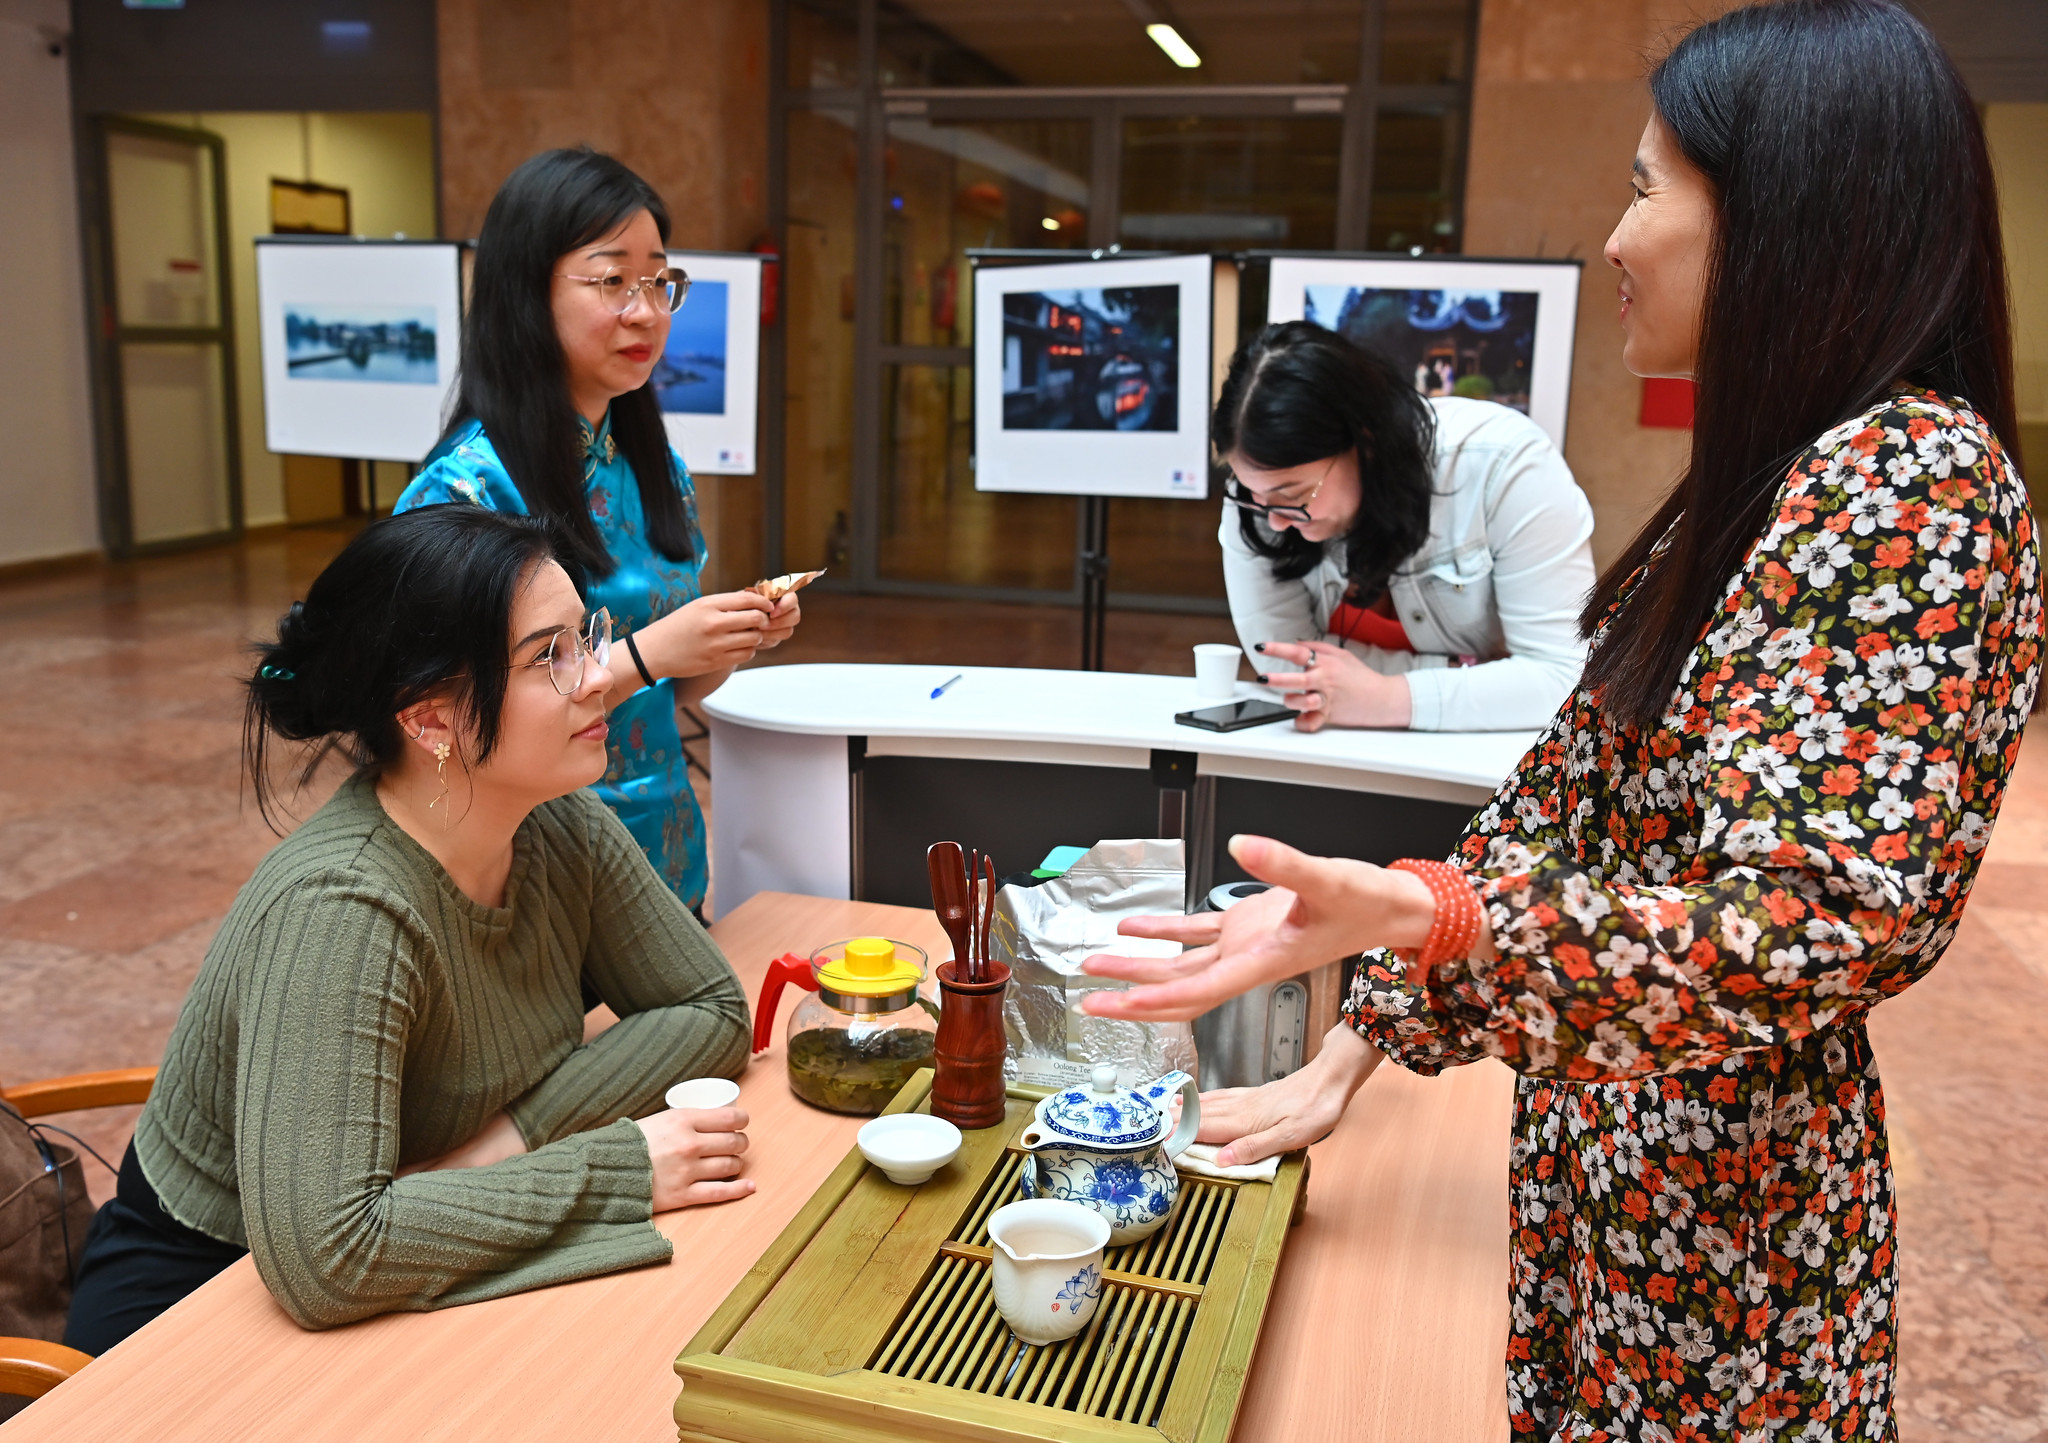 Flóra Tóth (sitting) drinks tea with teachers from the Confucius Institute during the first 